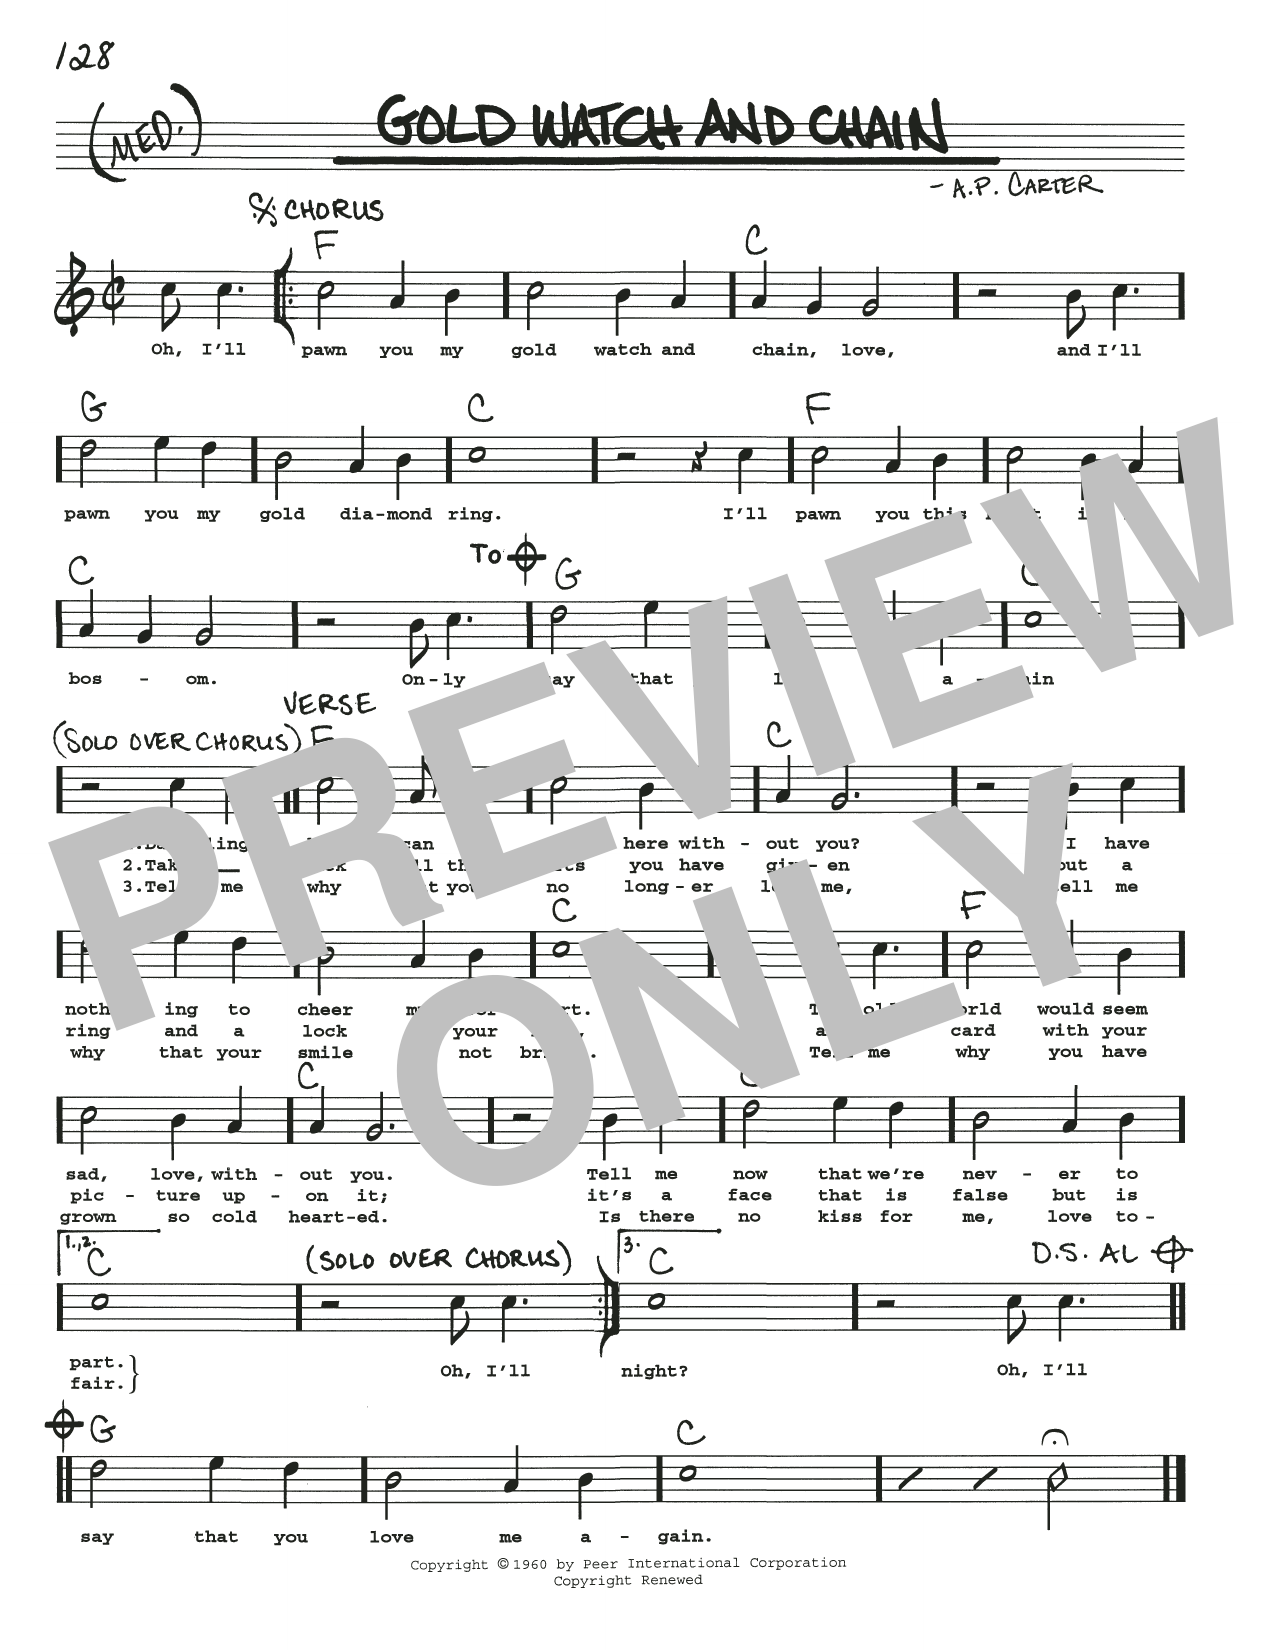 Download A.P. Carter Gold Watch And Chain Sheet Music